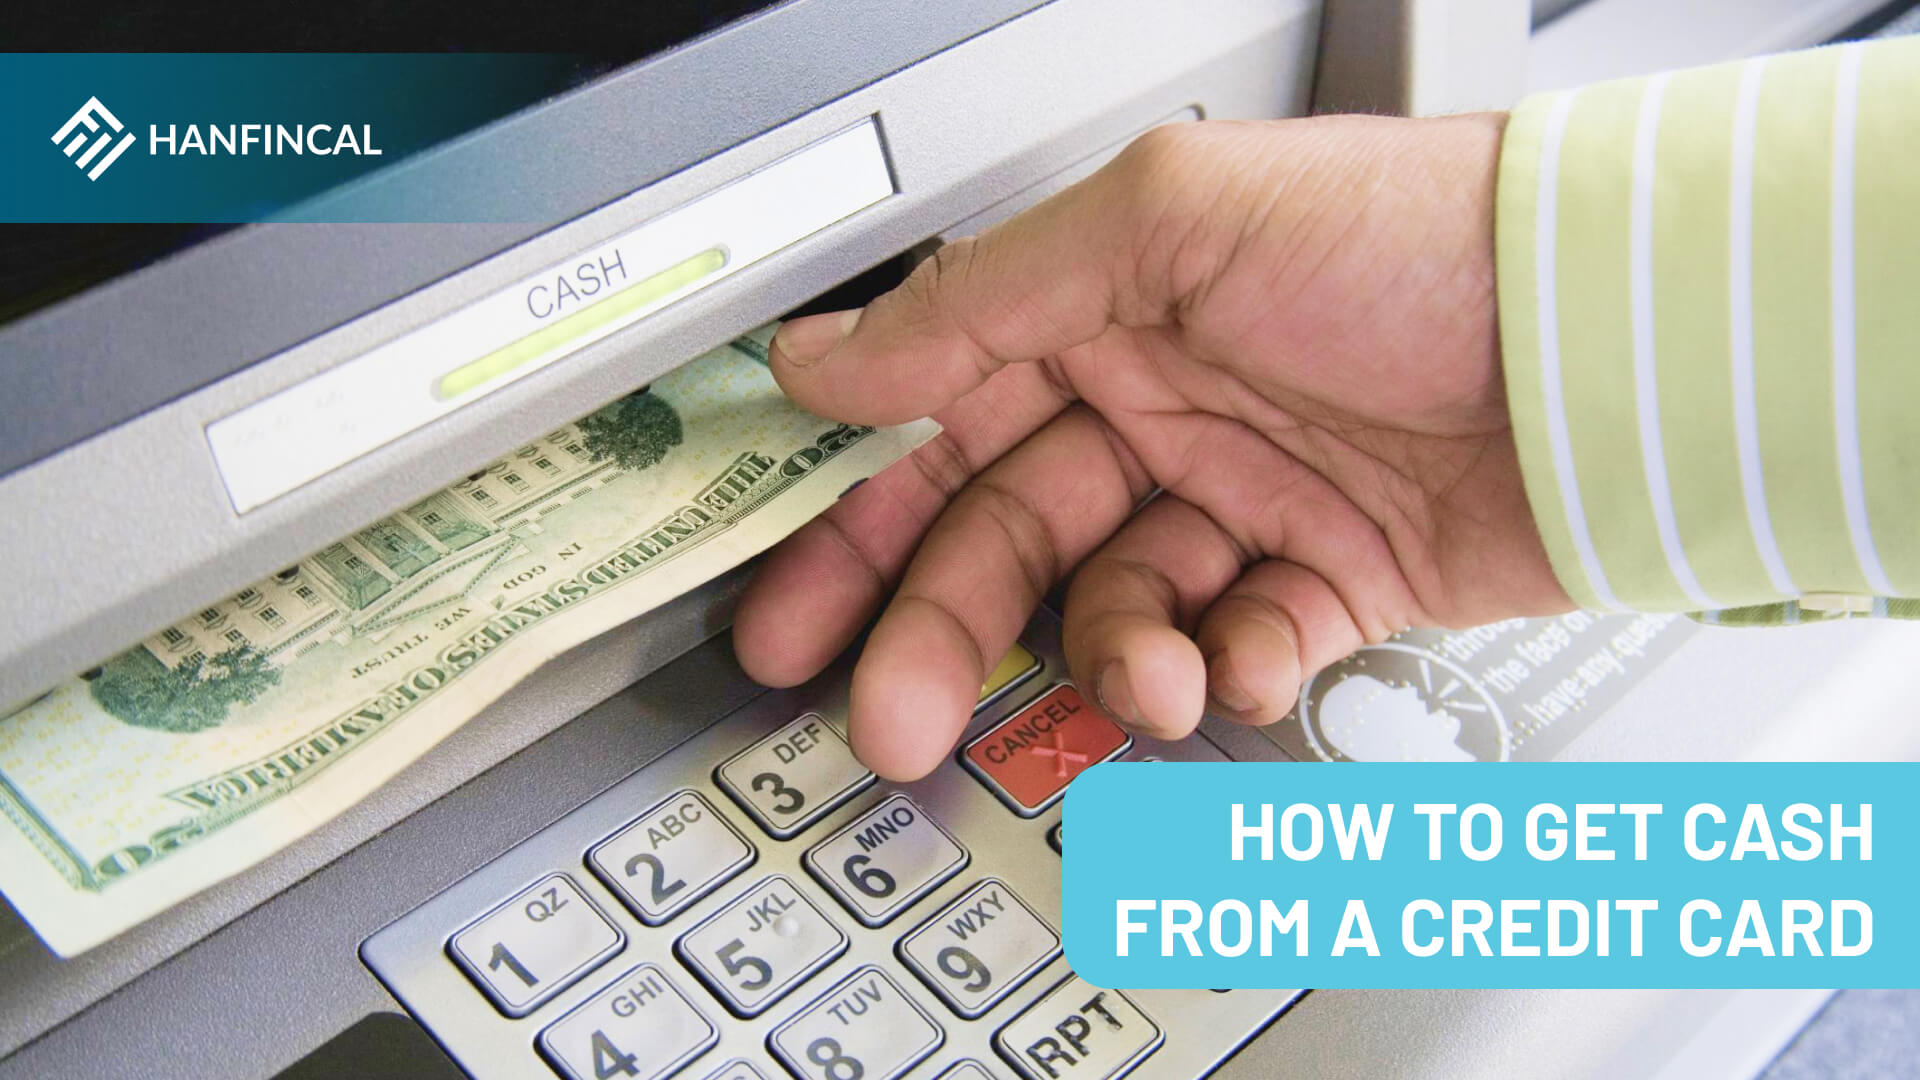 How to get cash from a credit card?